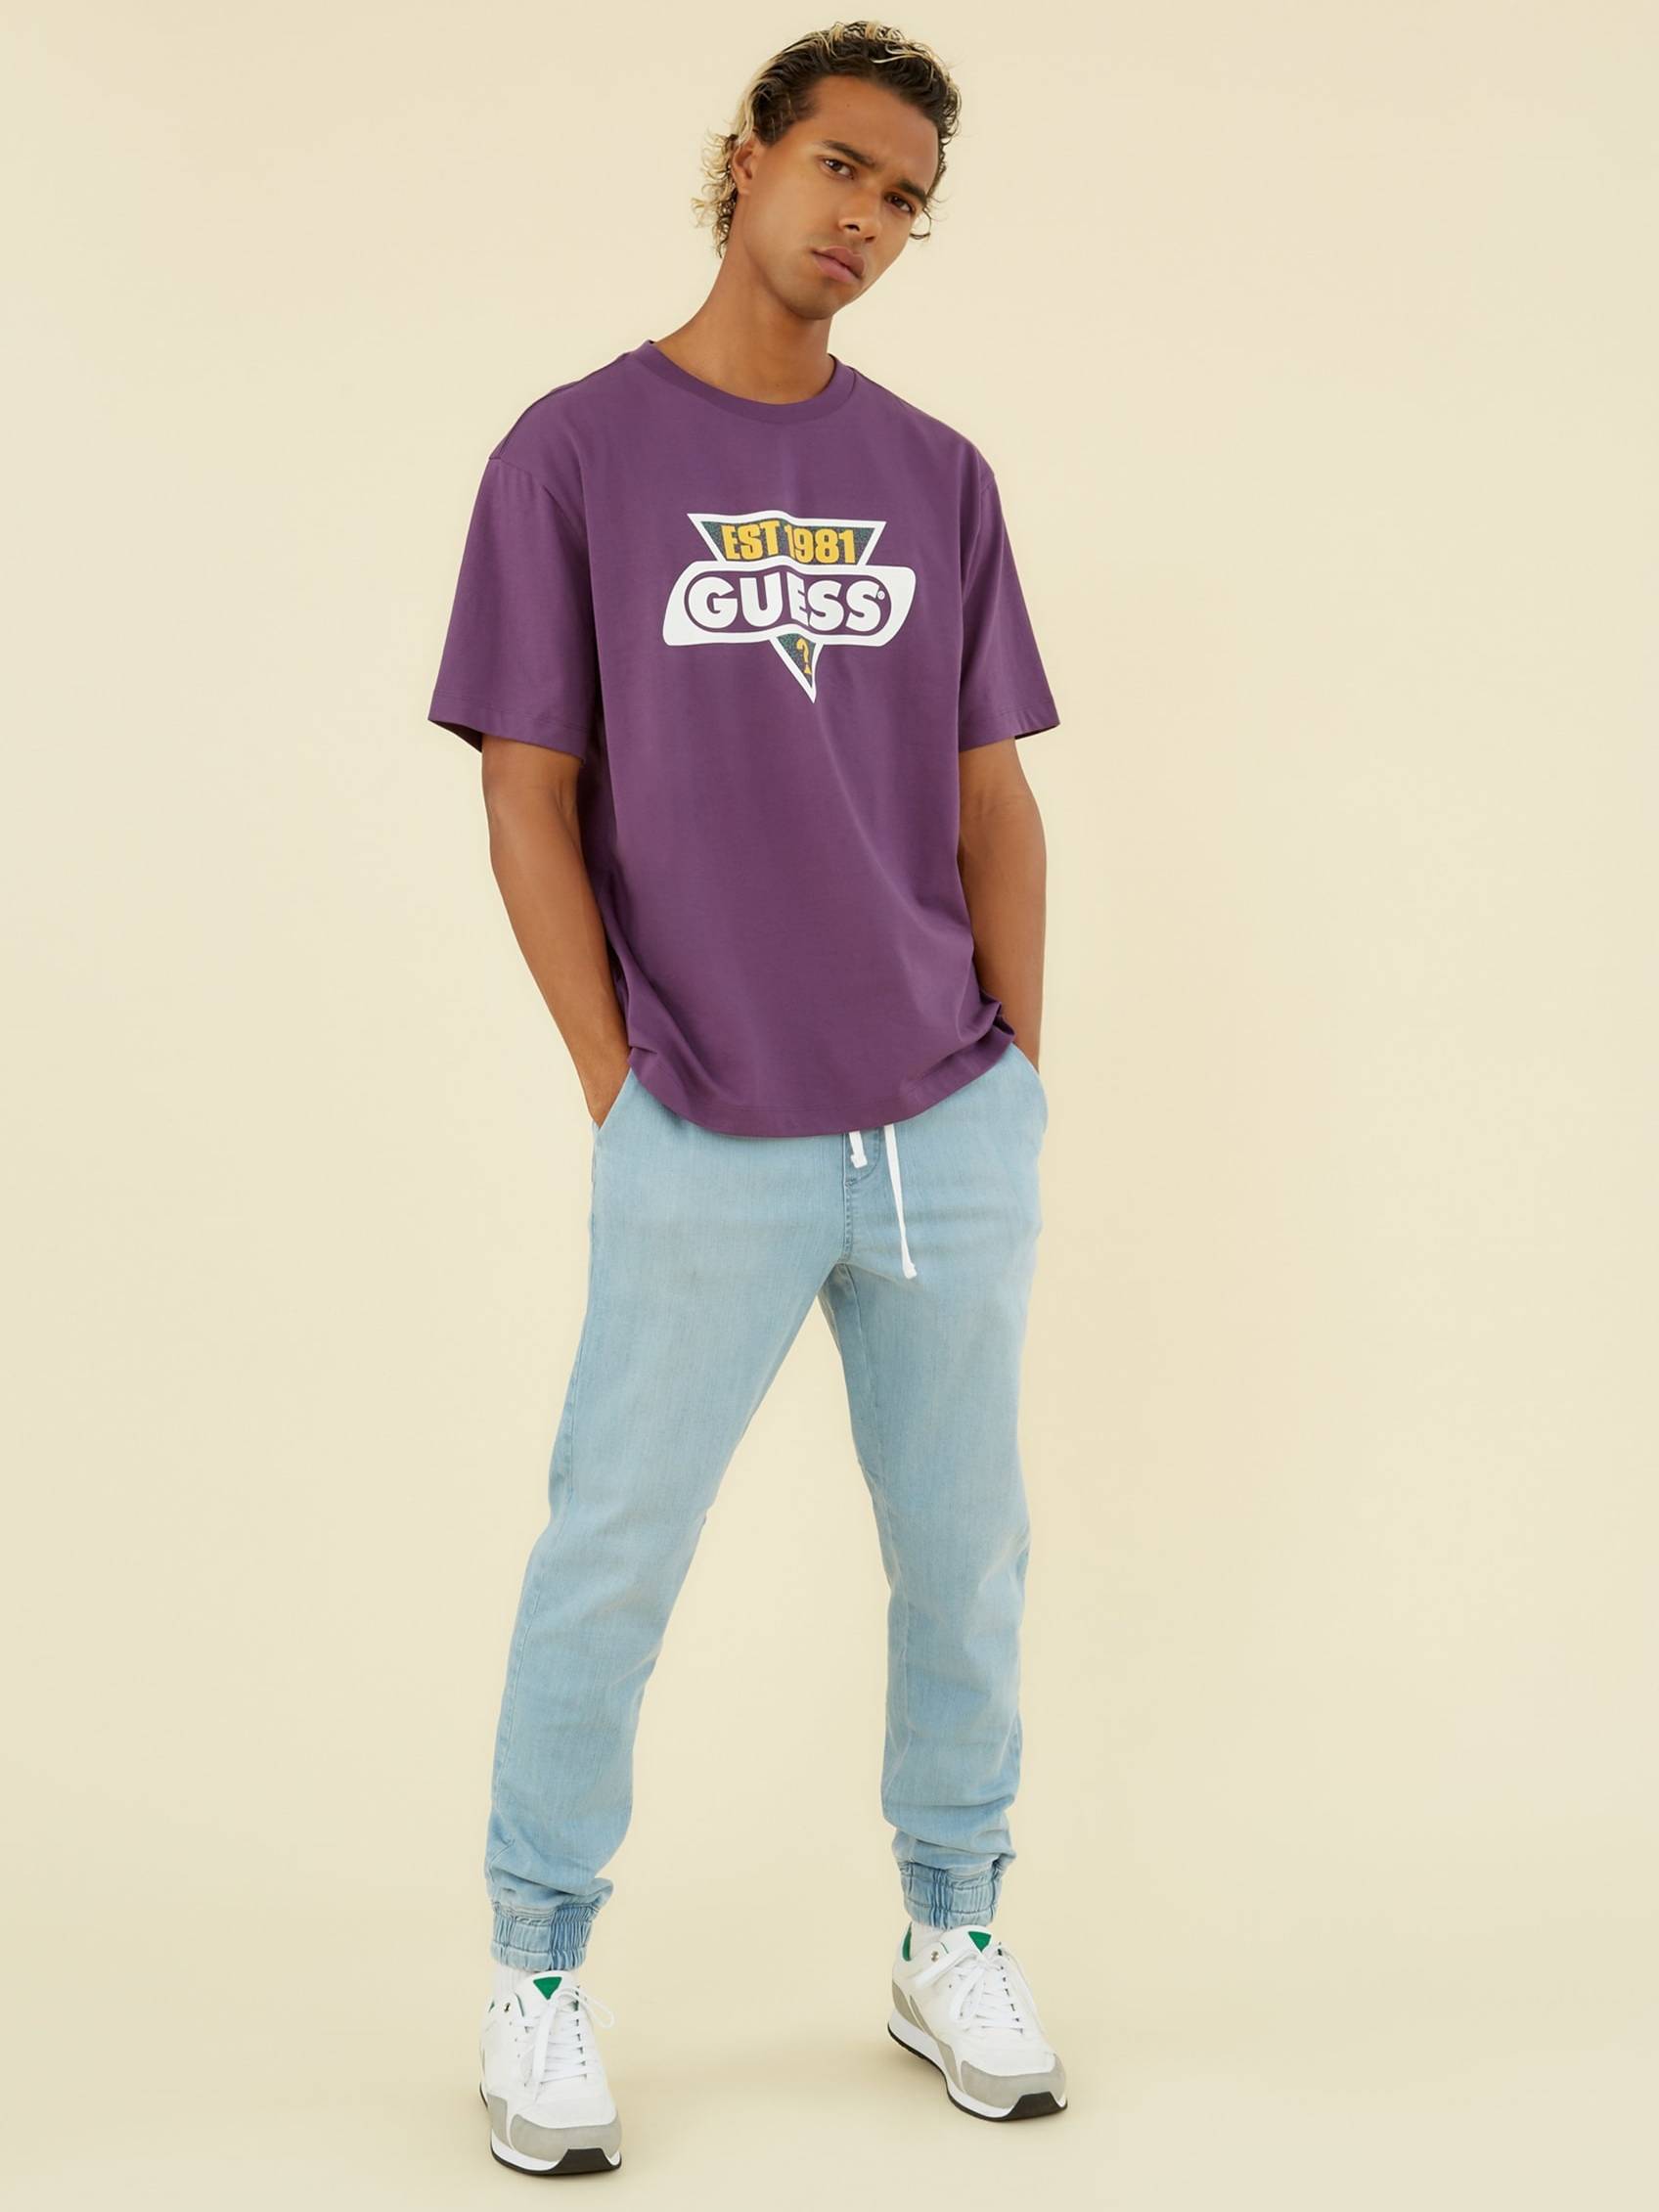 Guess Originals Oversized Race Guess Philippines